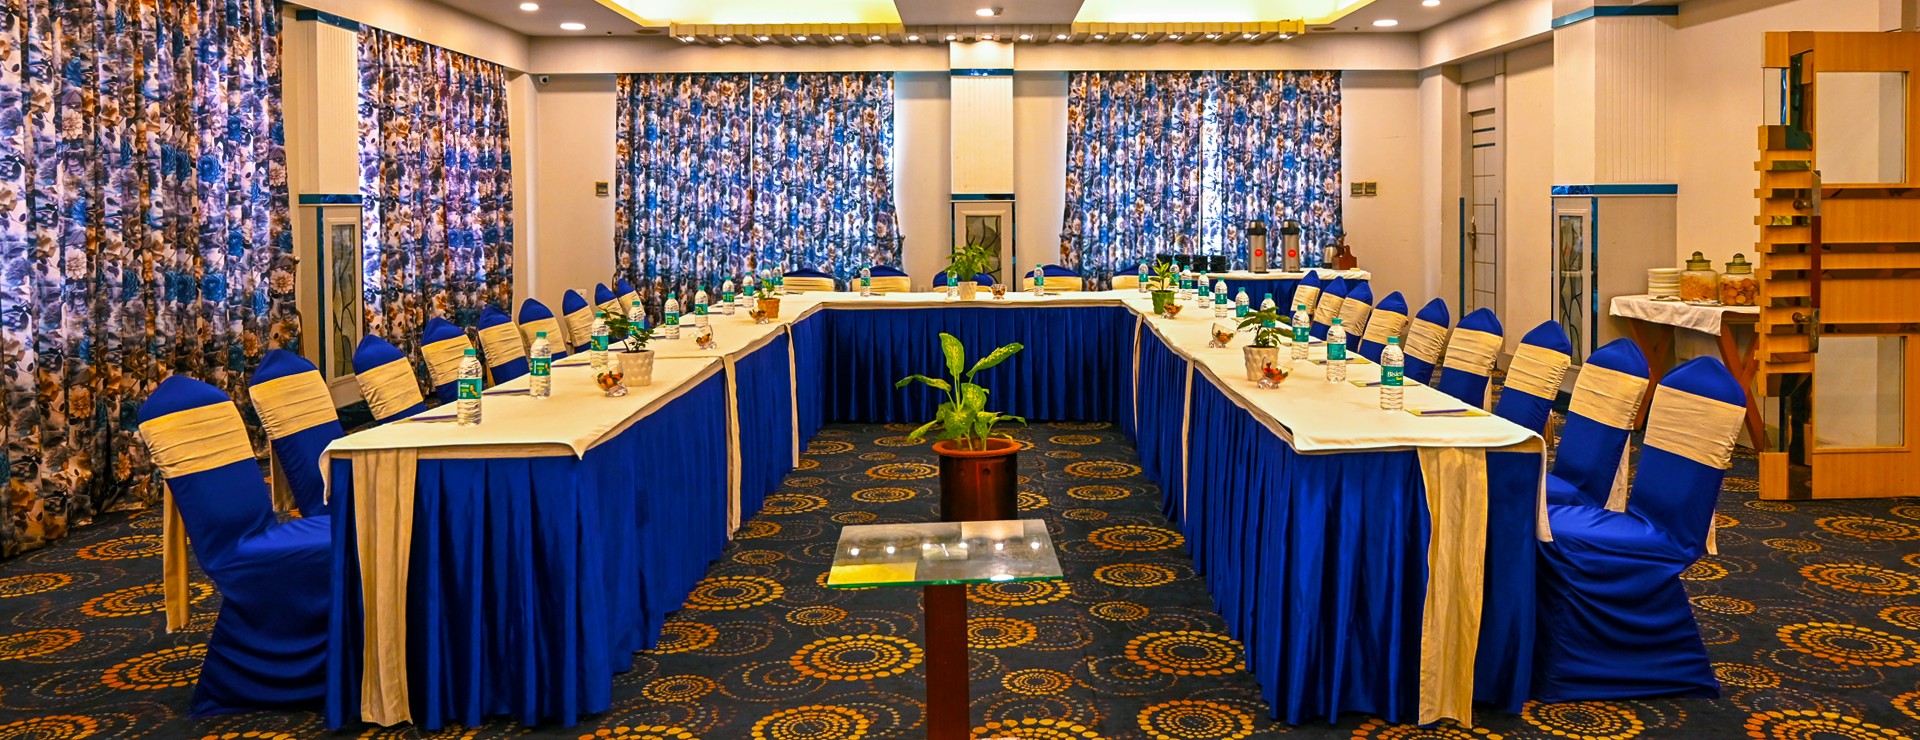 Gargee Hotels Conference Room